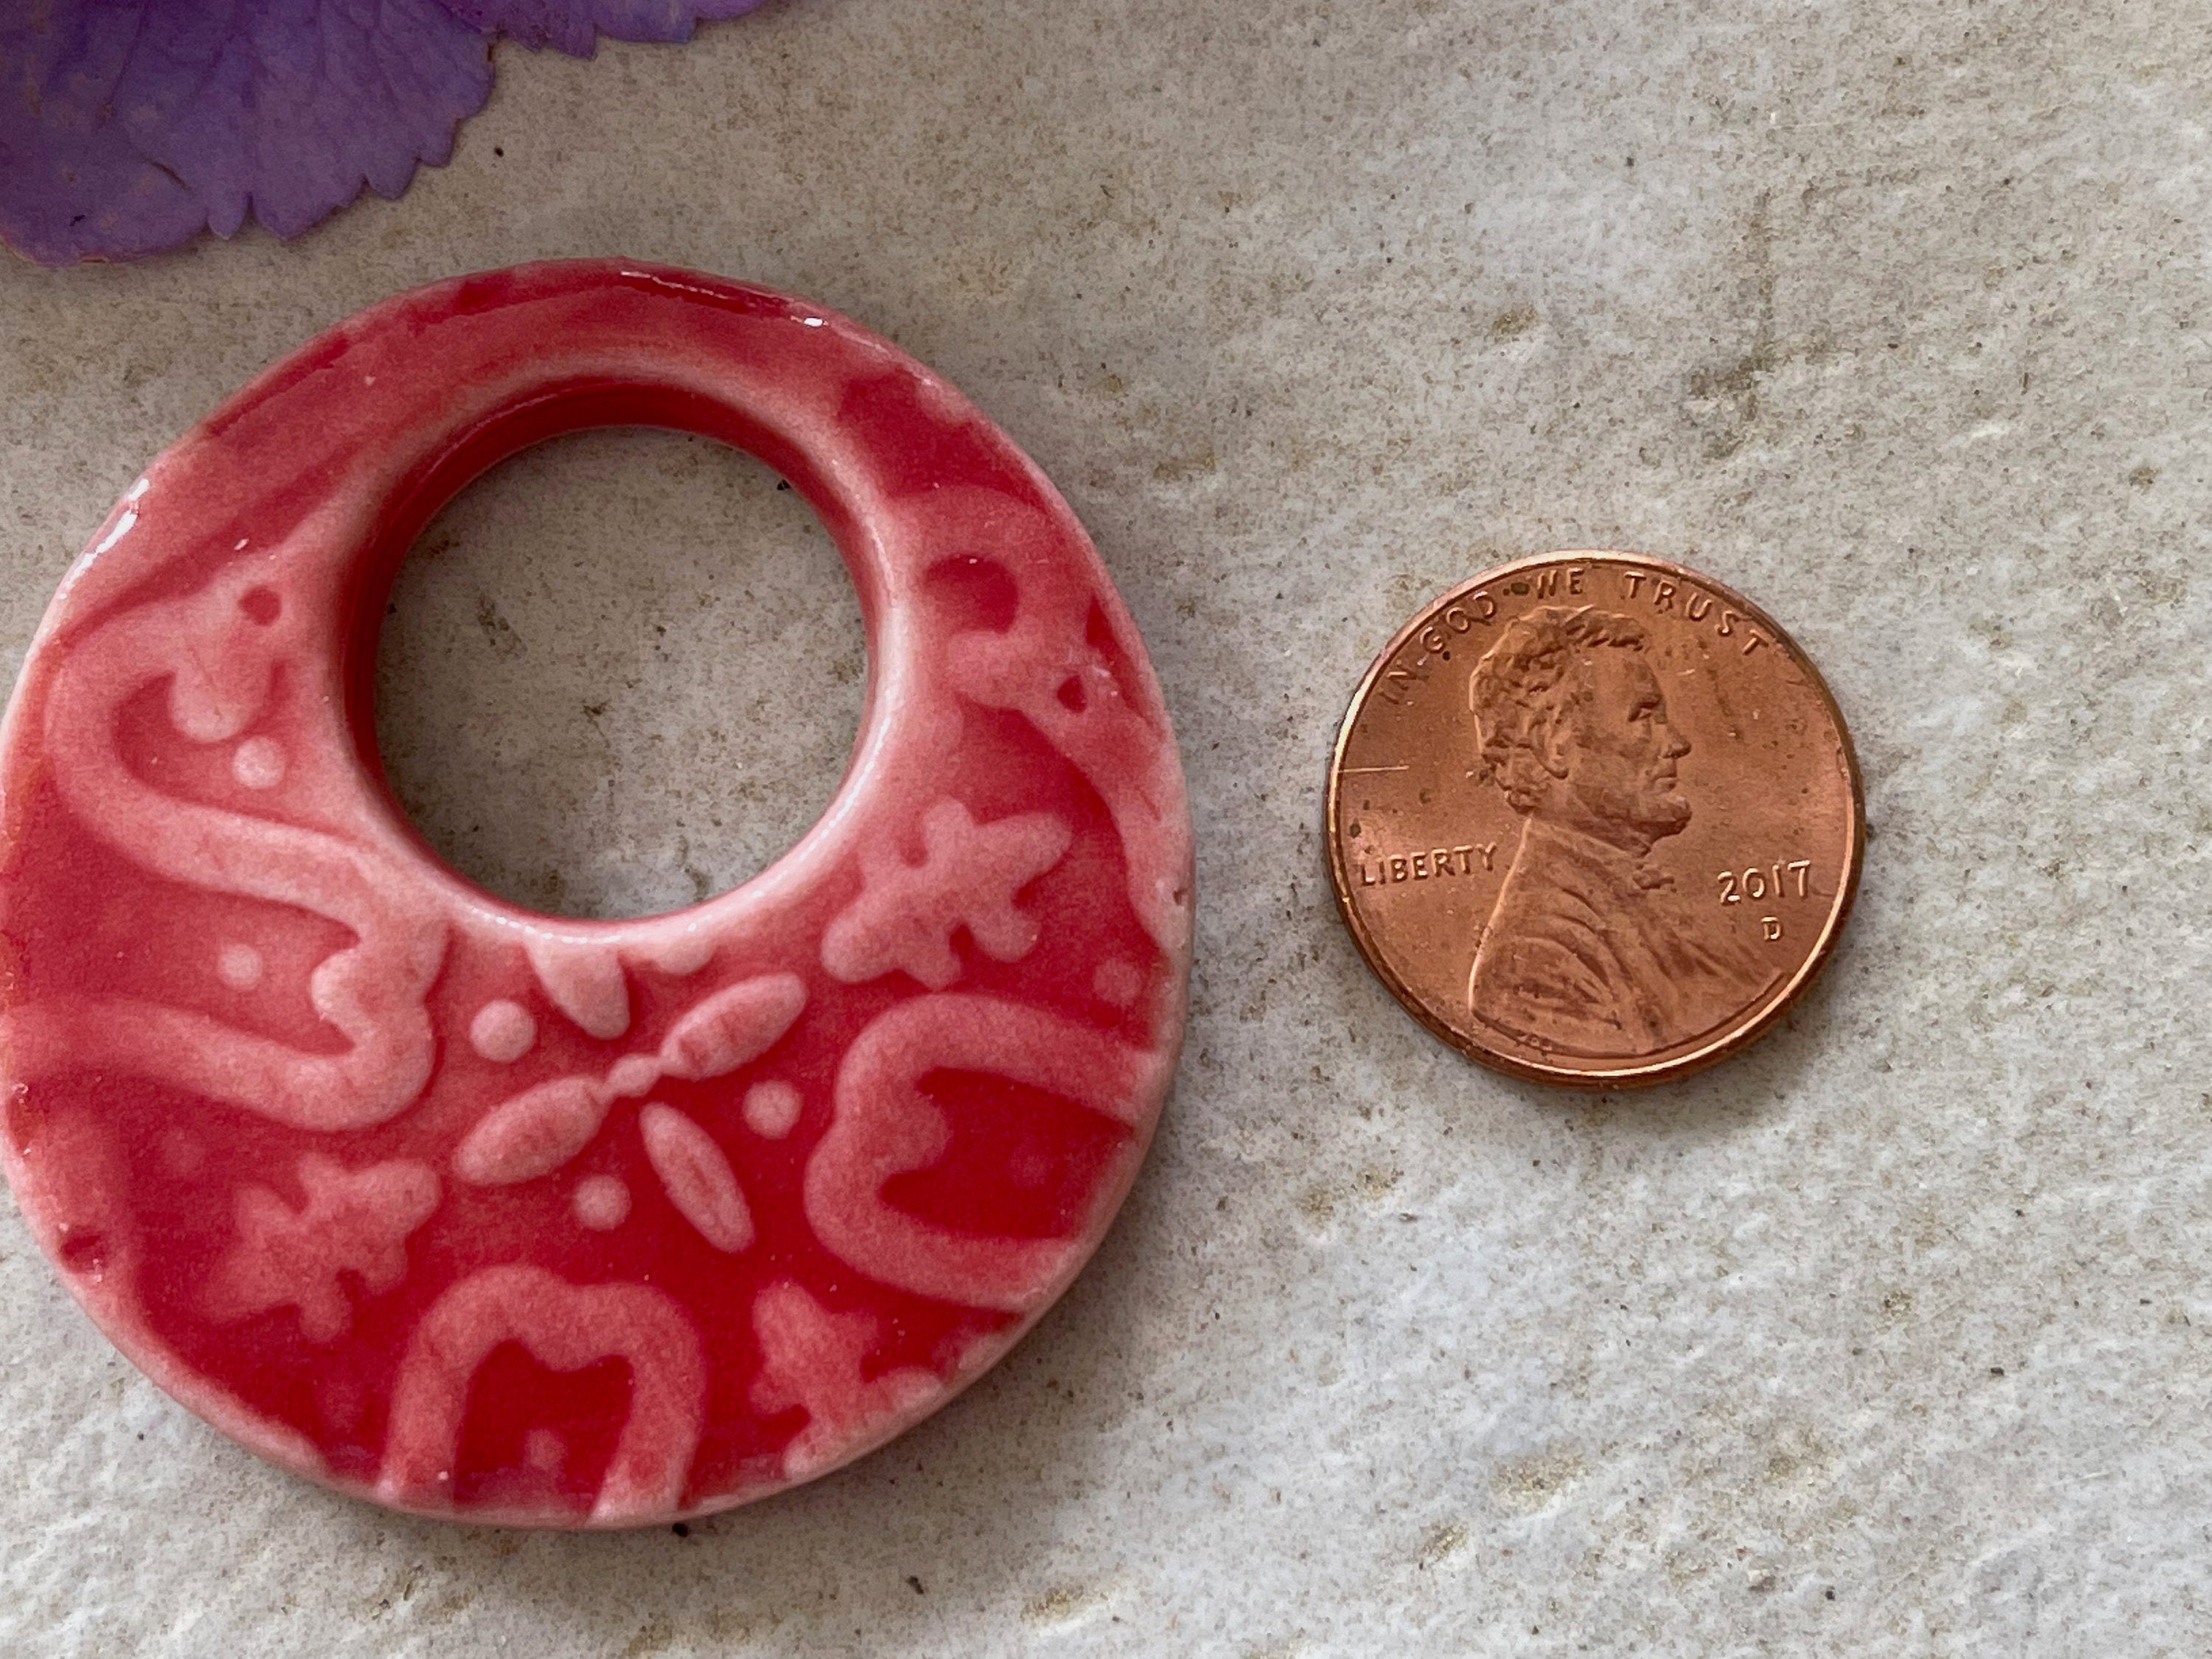 Red Pendant, Circle Pendant, Focal Bead, Necklace Bead, Necklace Component, Jewelry Component, DIY necklace, Moroccan Pendant